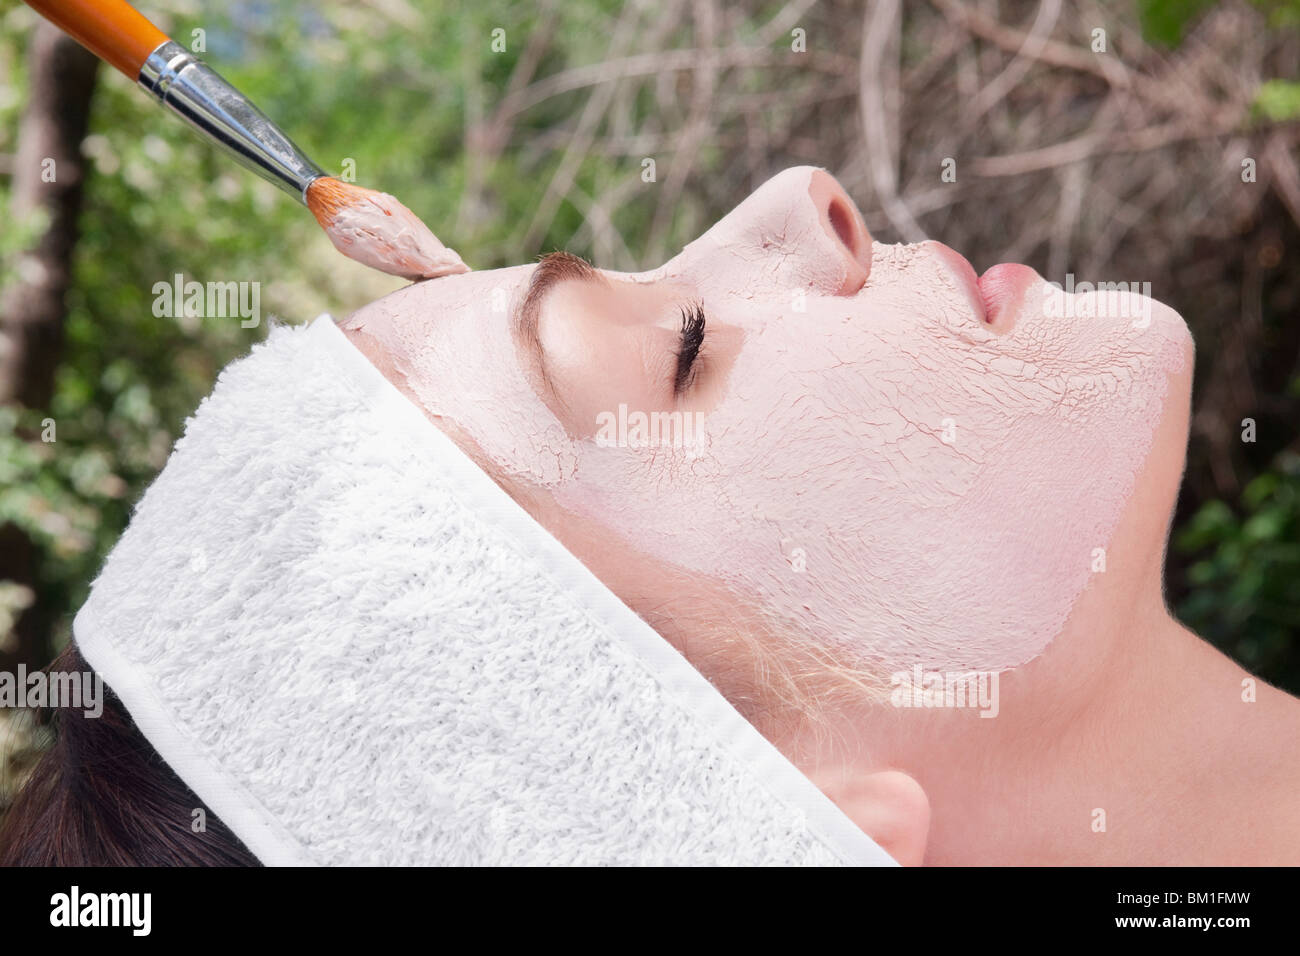 Woman applying face pack Stock Photo